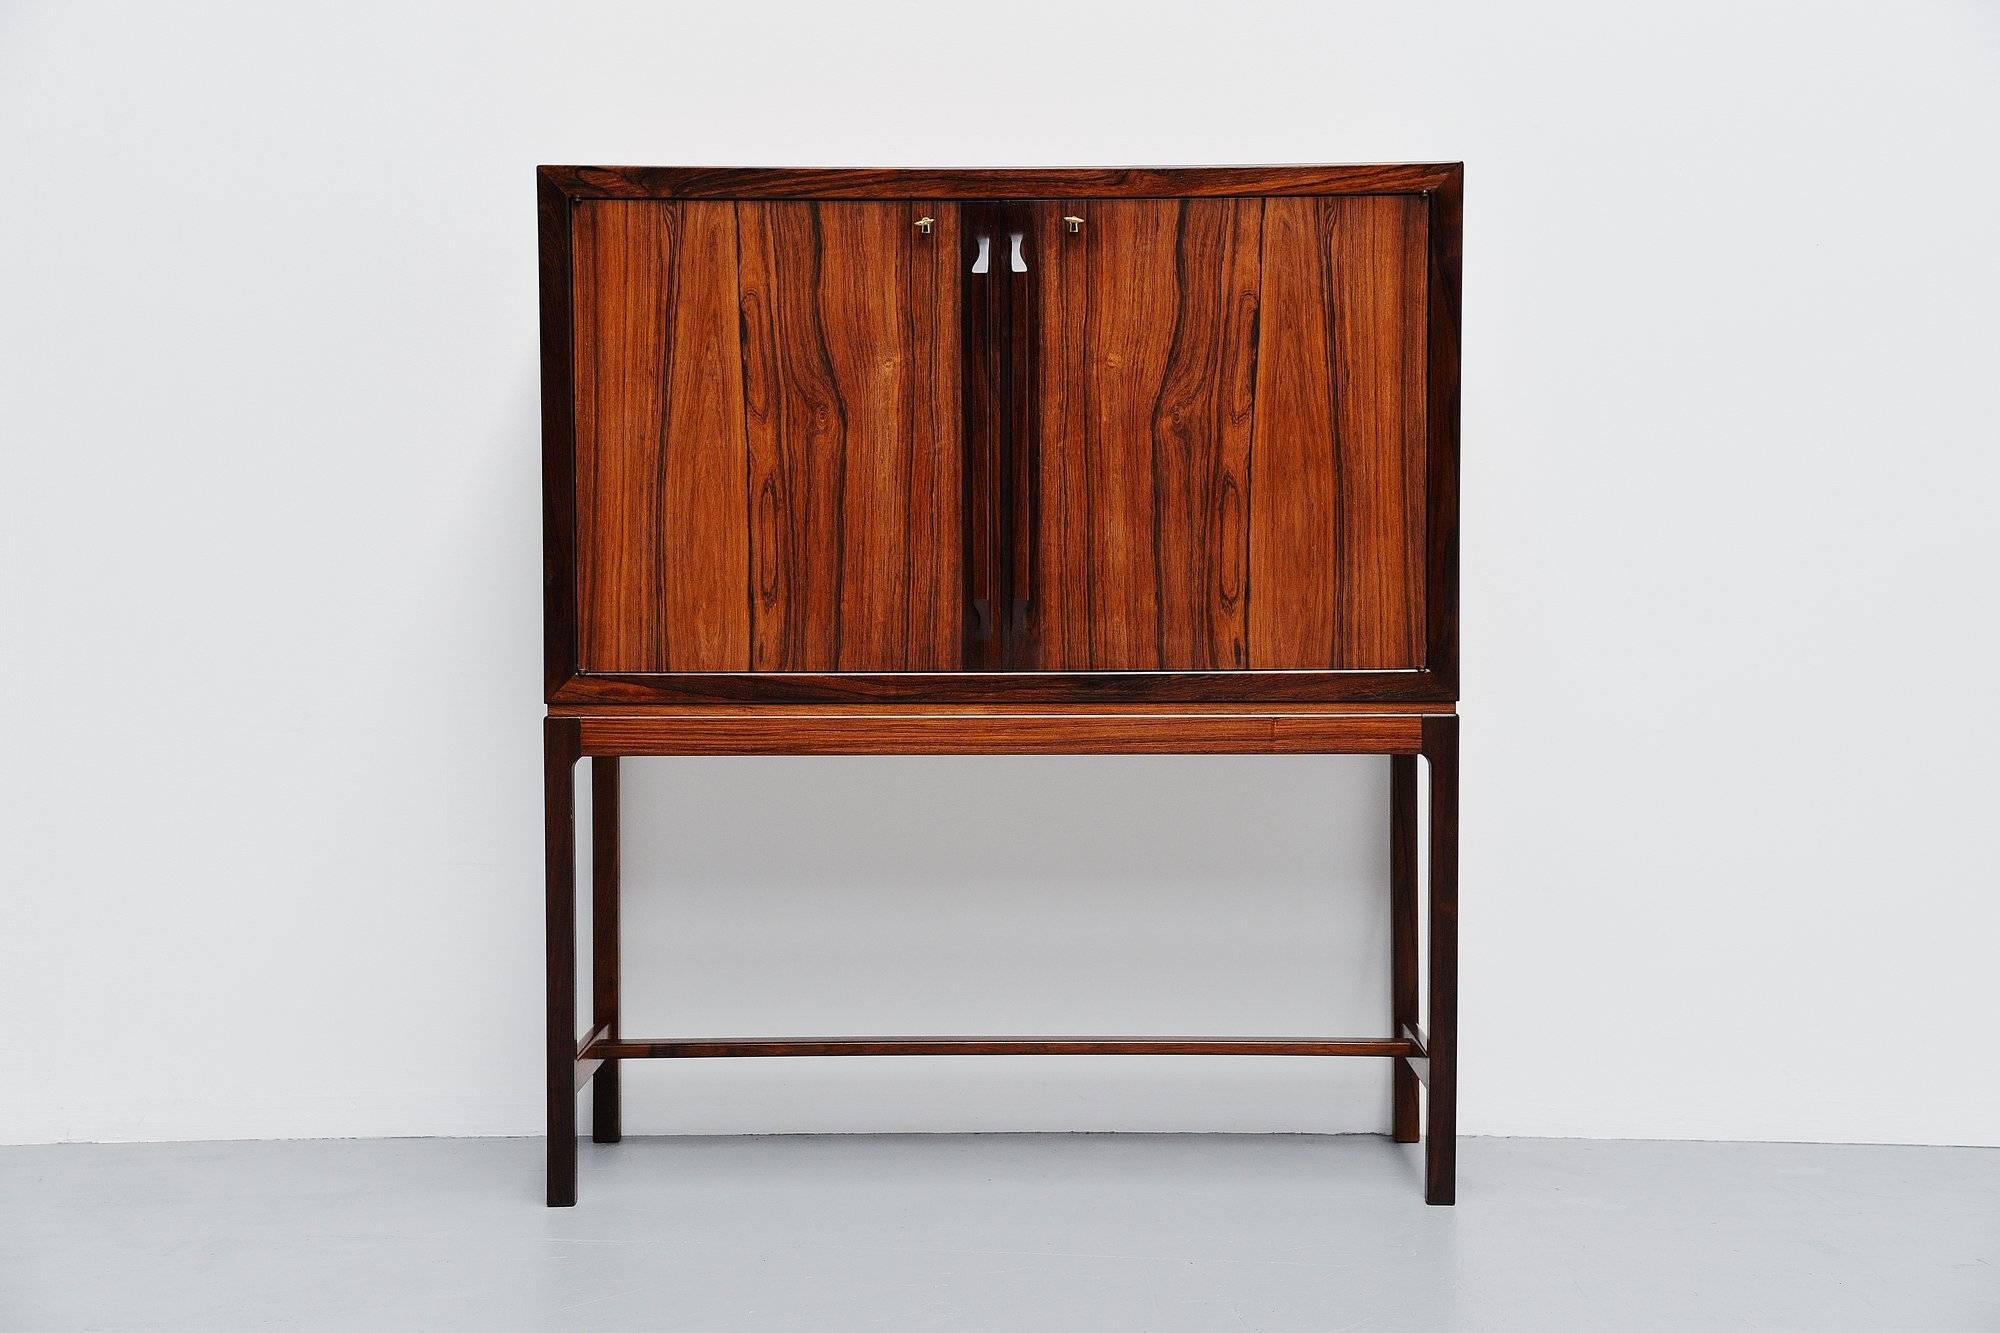 Highly refined dry bar cabinet in rosewood designed by Torbjorn Afdal, manufactured by Bruksbo Norway, 1960. This high quality dry bar is fantastically made and has a very nice inside with mirror, glass shelves, bottle holders and extractable tray